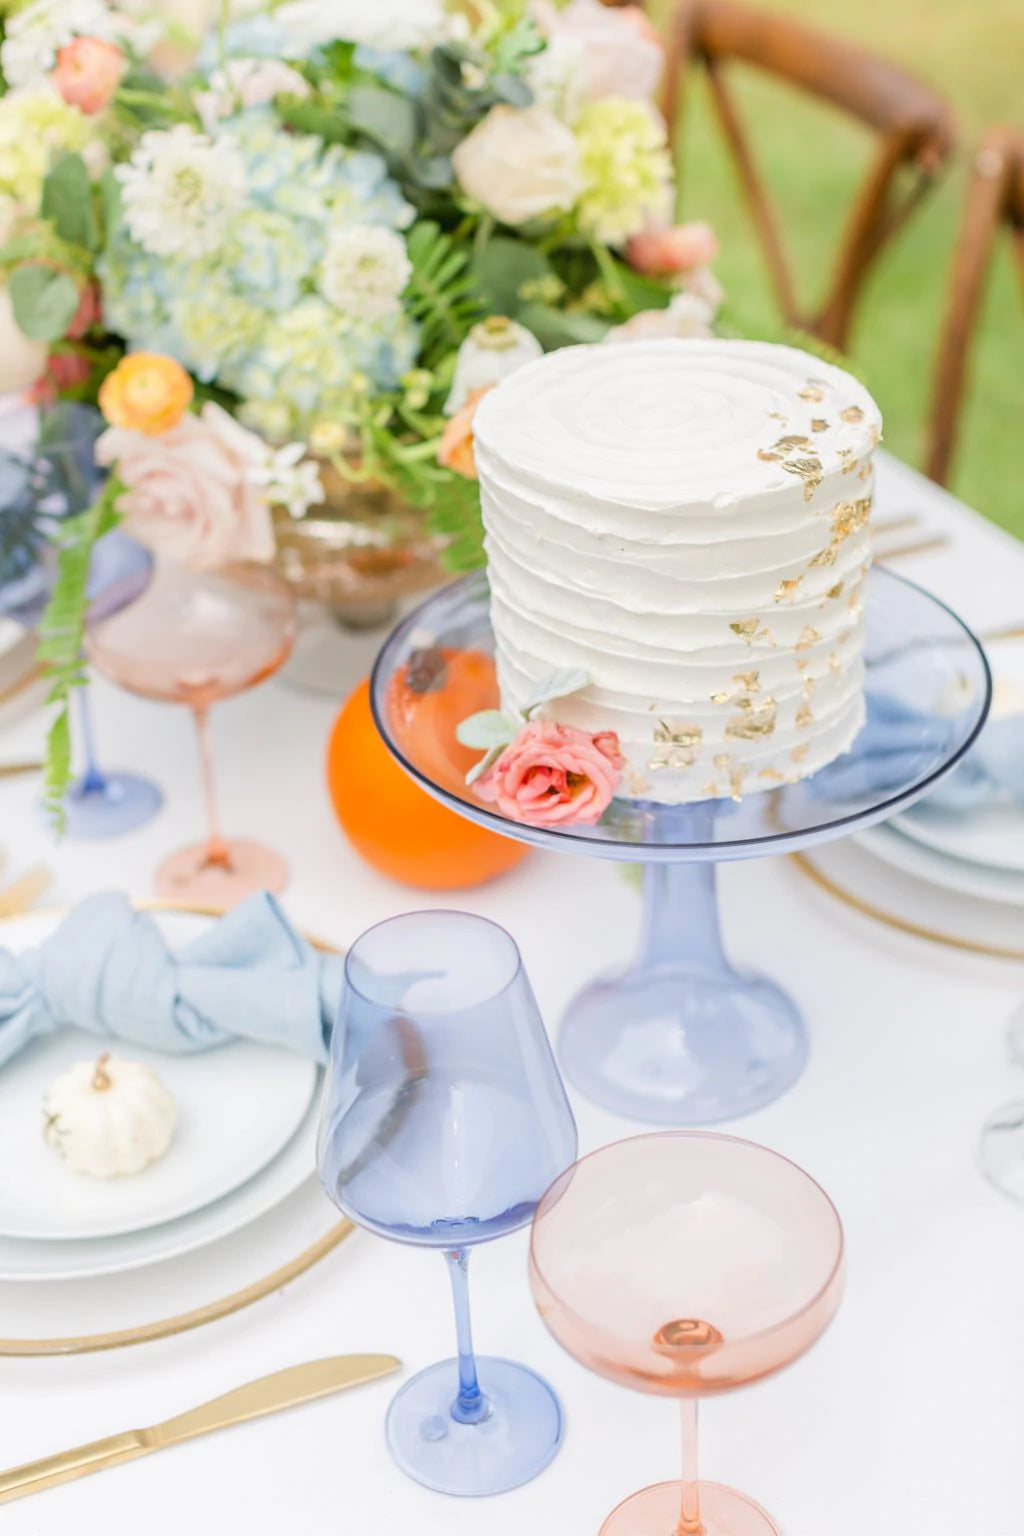 Estelle Cake Stand with Dome